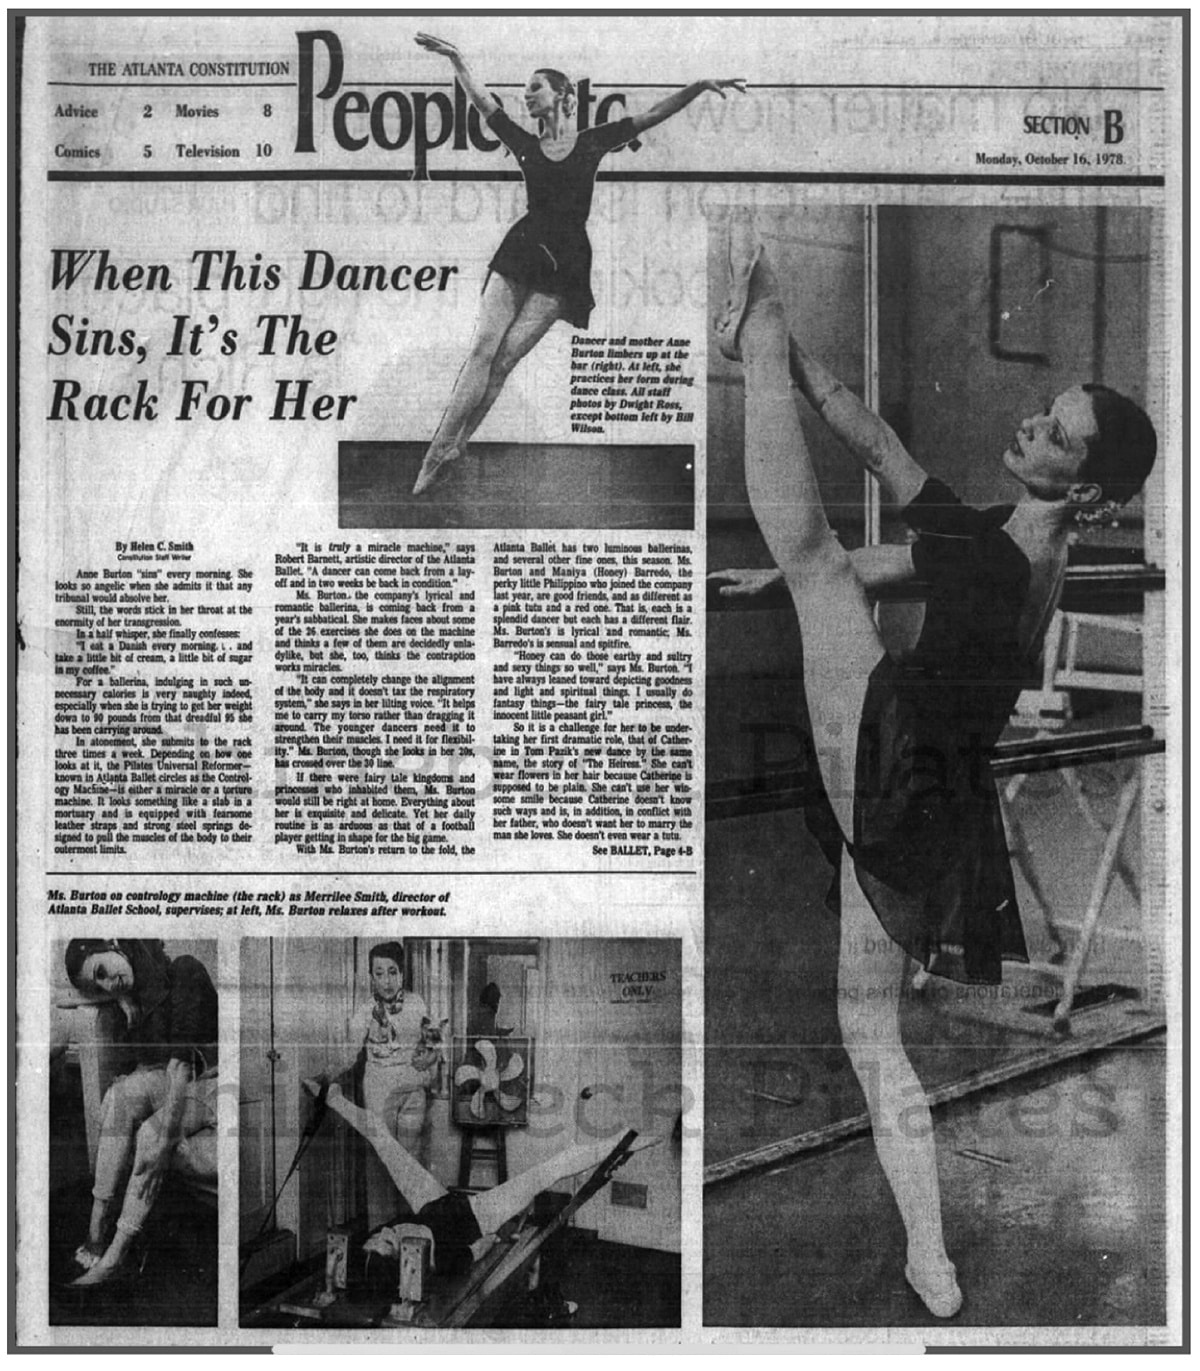 Merilee Smith pilates Archive article: When this Dancer Sins...